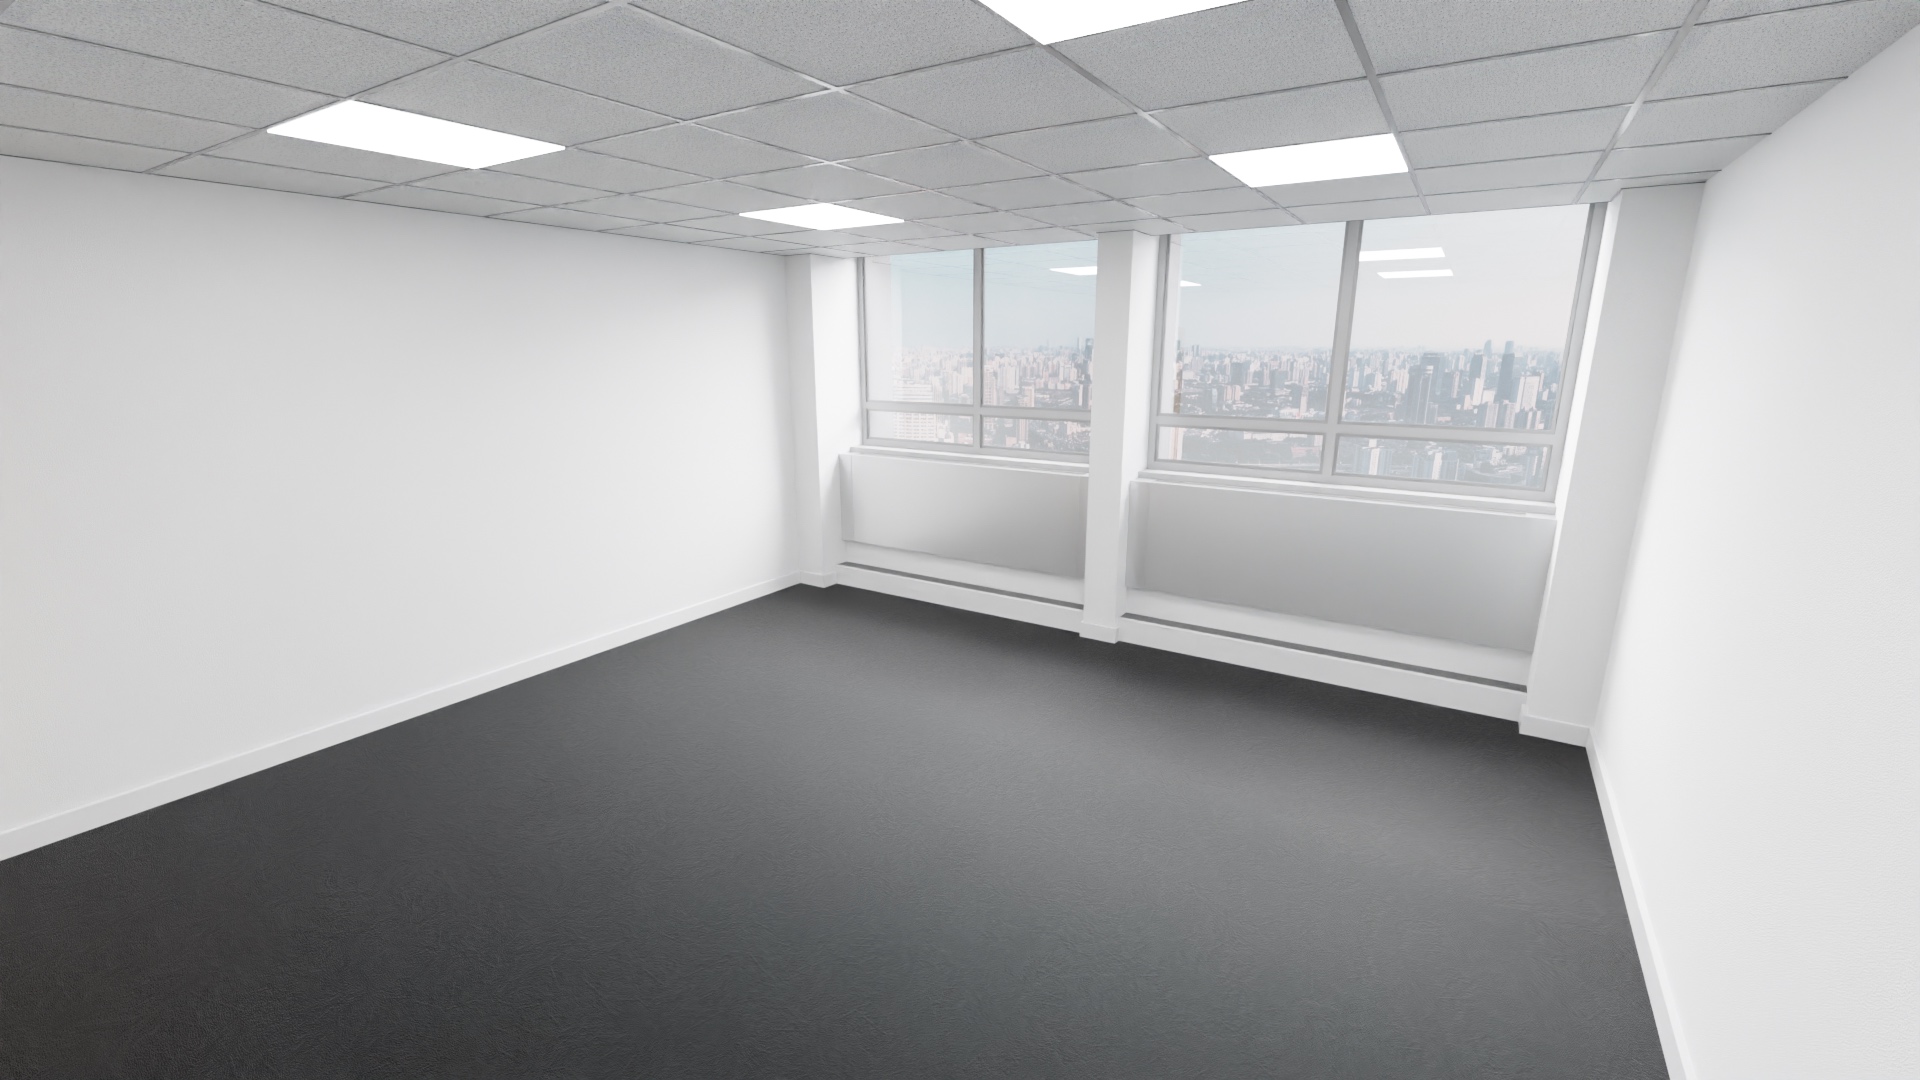 290 - 335 Sq.Ft Office / Studio / Workspace in exciting new hub